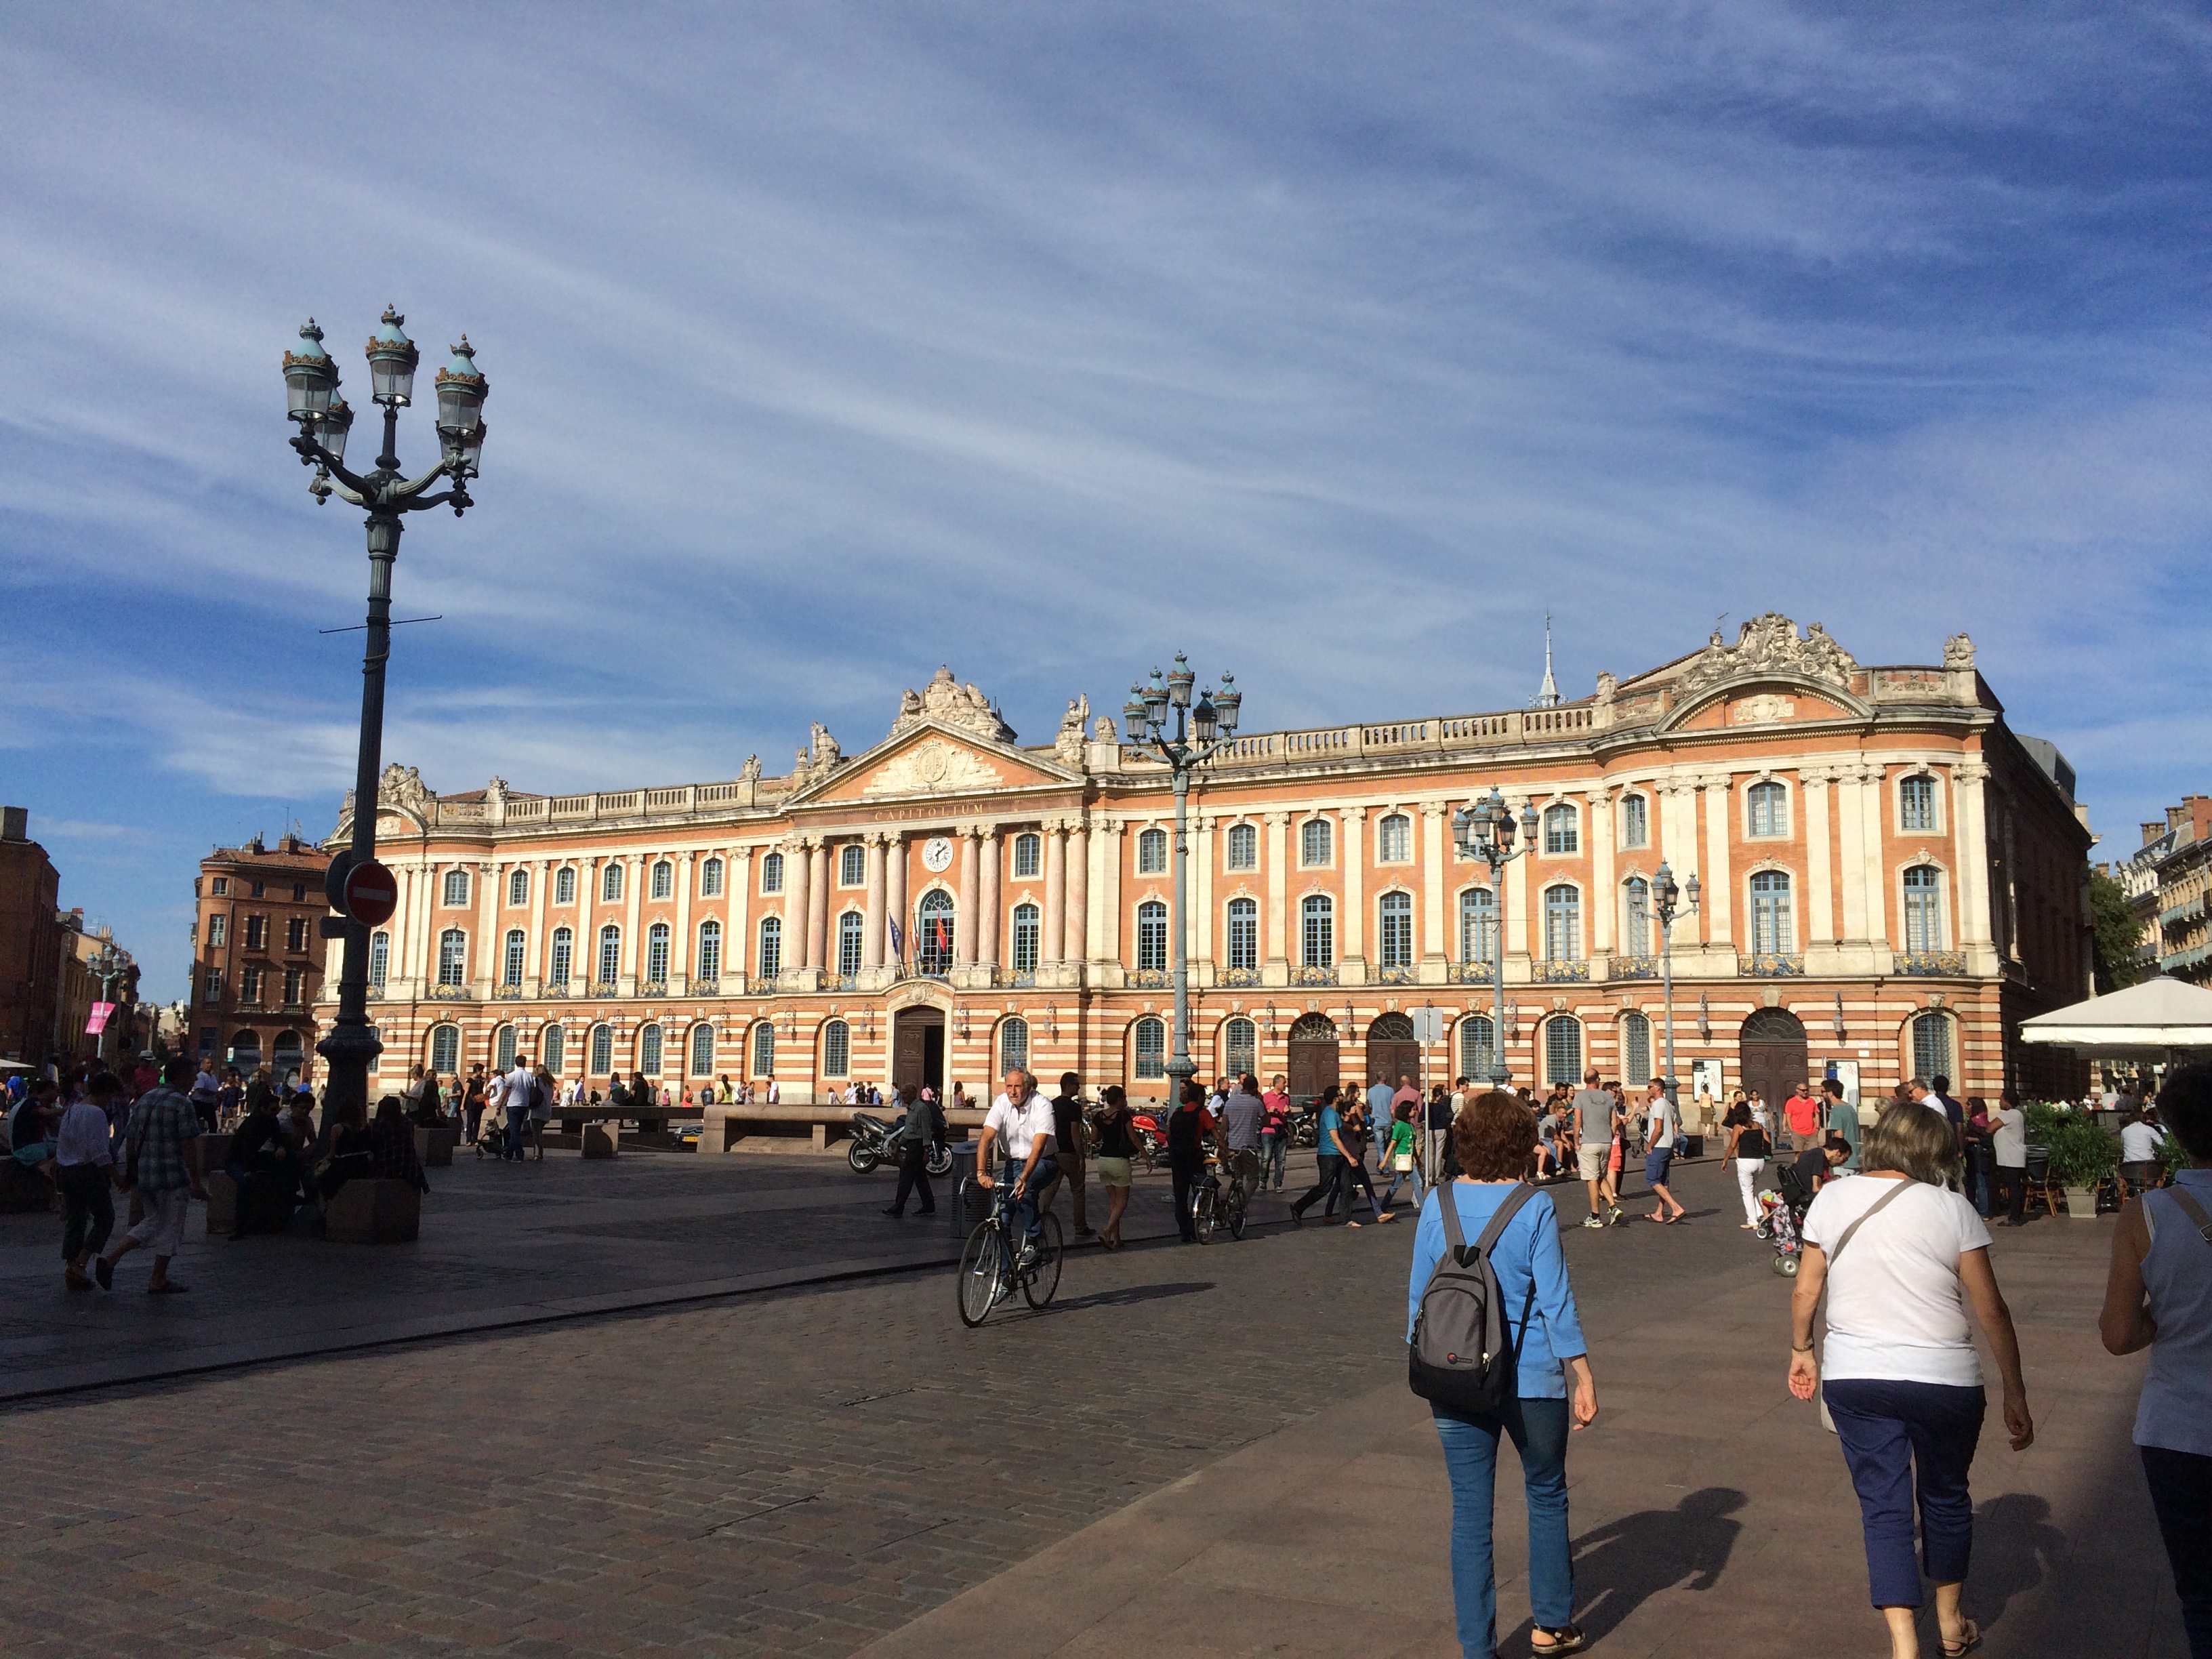 The Capitole